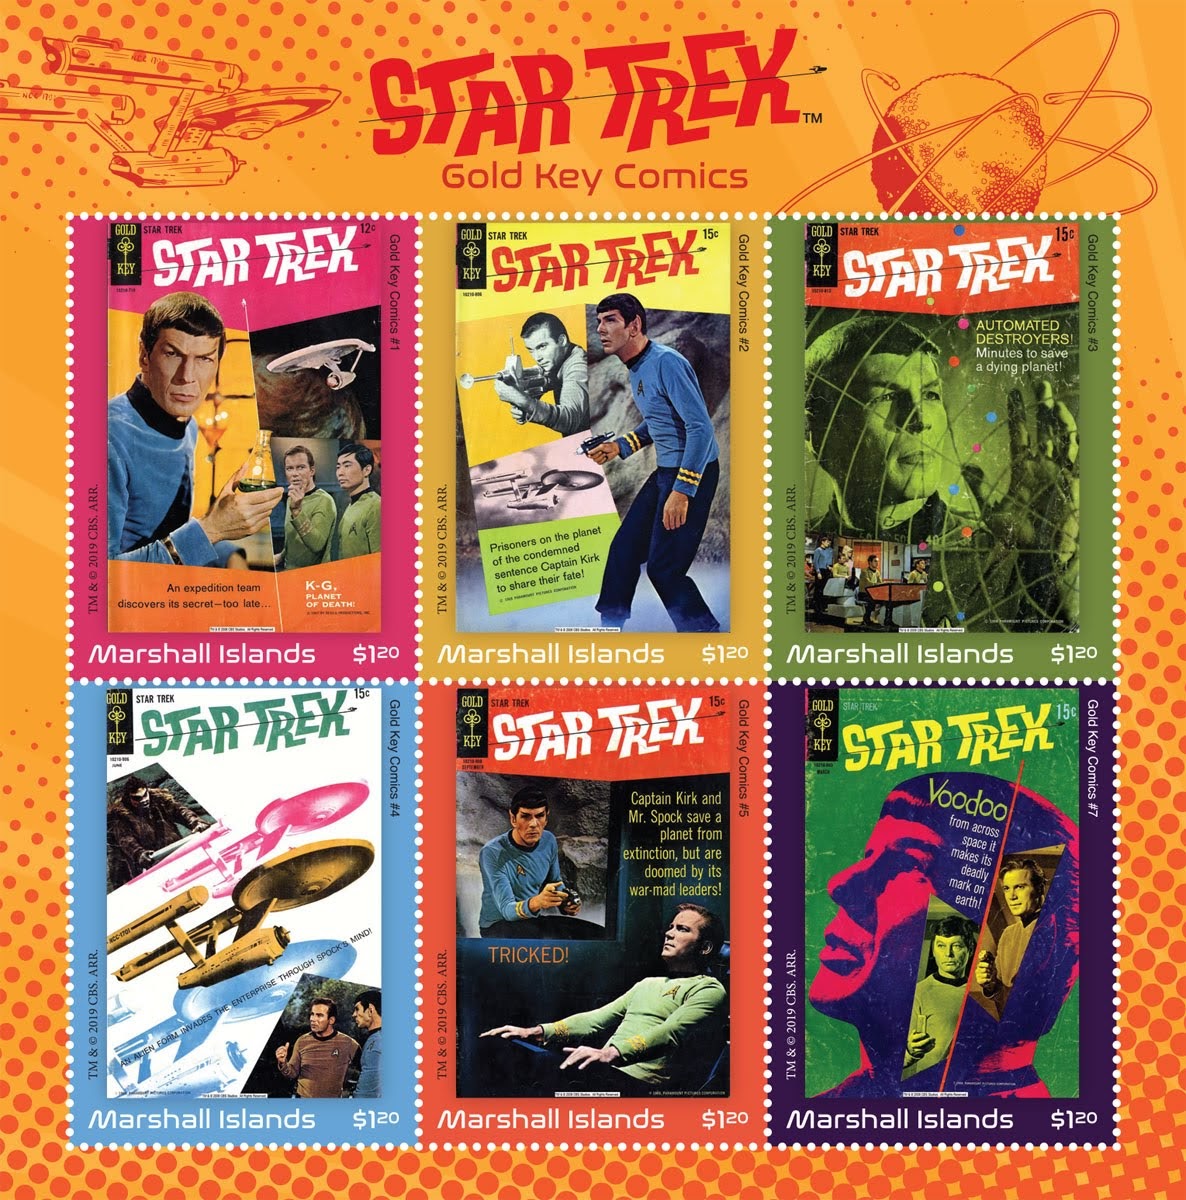 Star Trek stamps from Marshall Islands